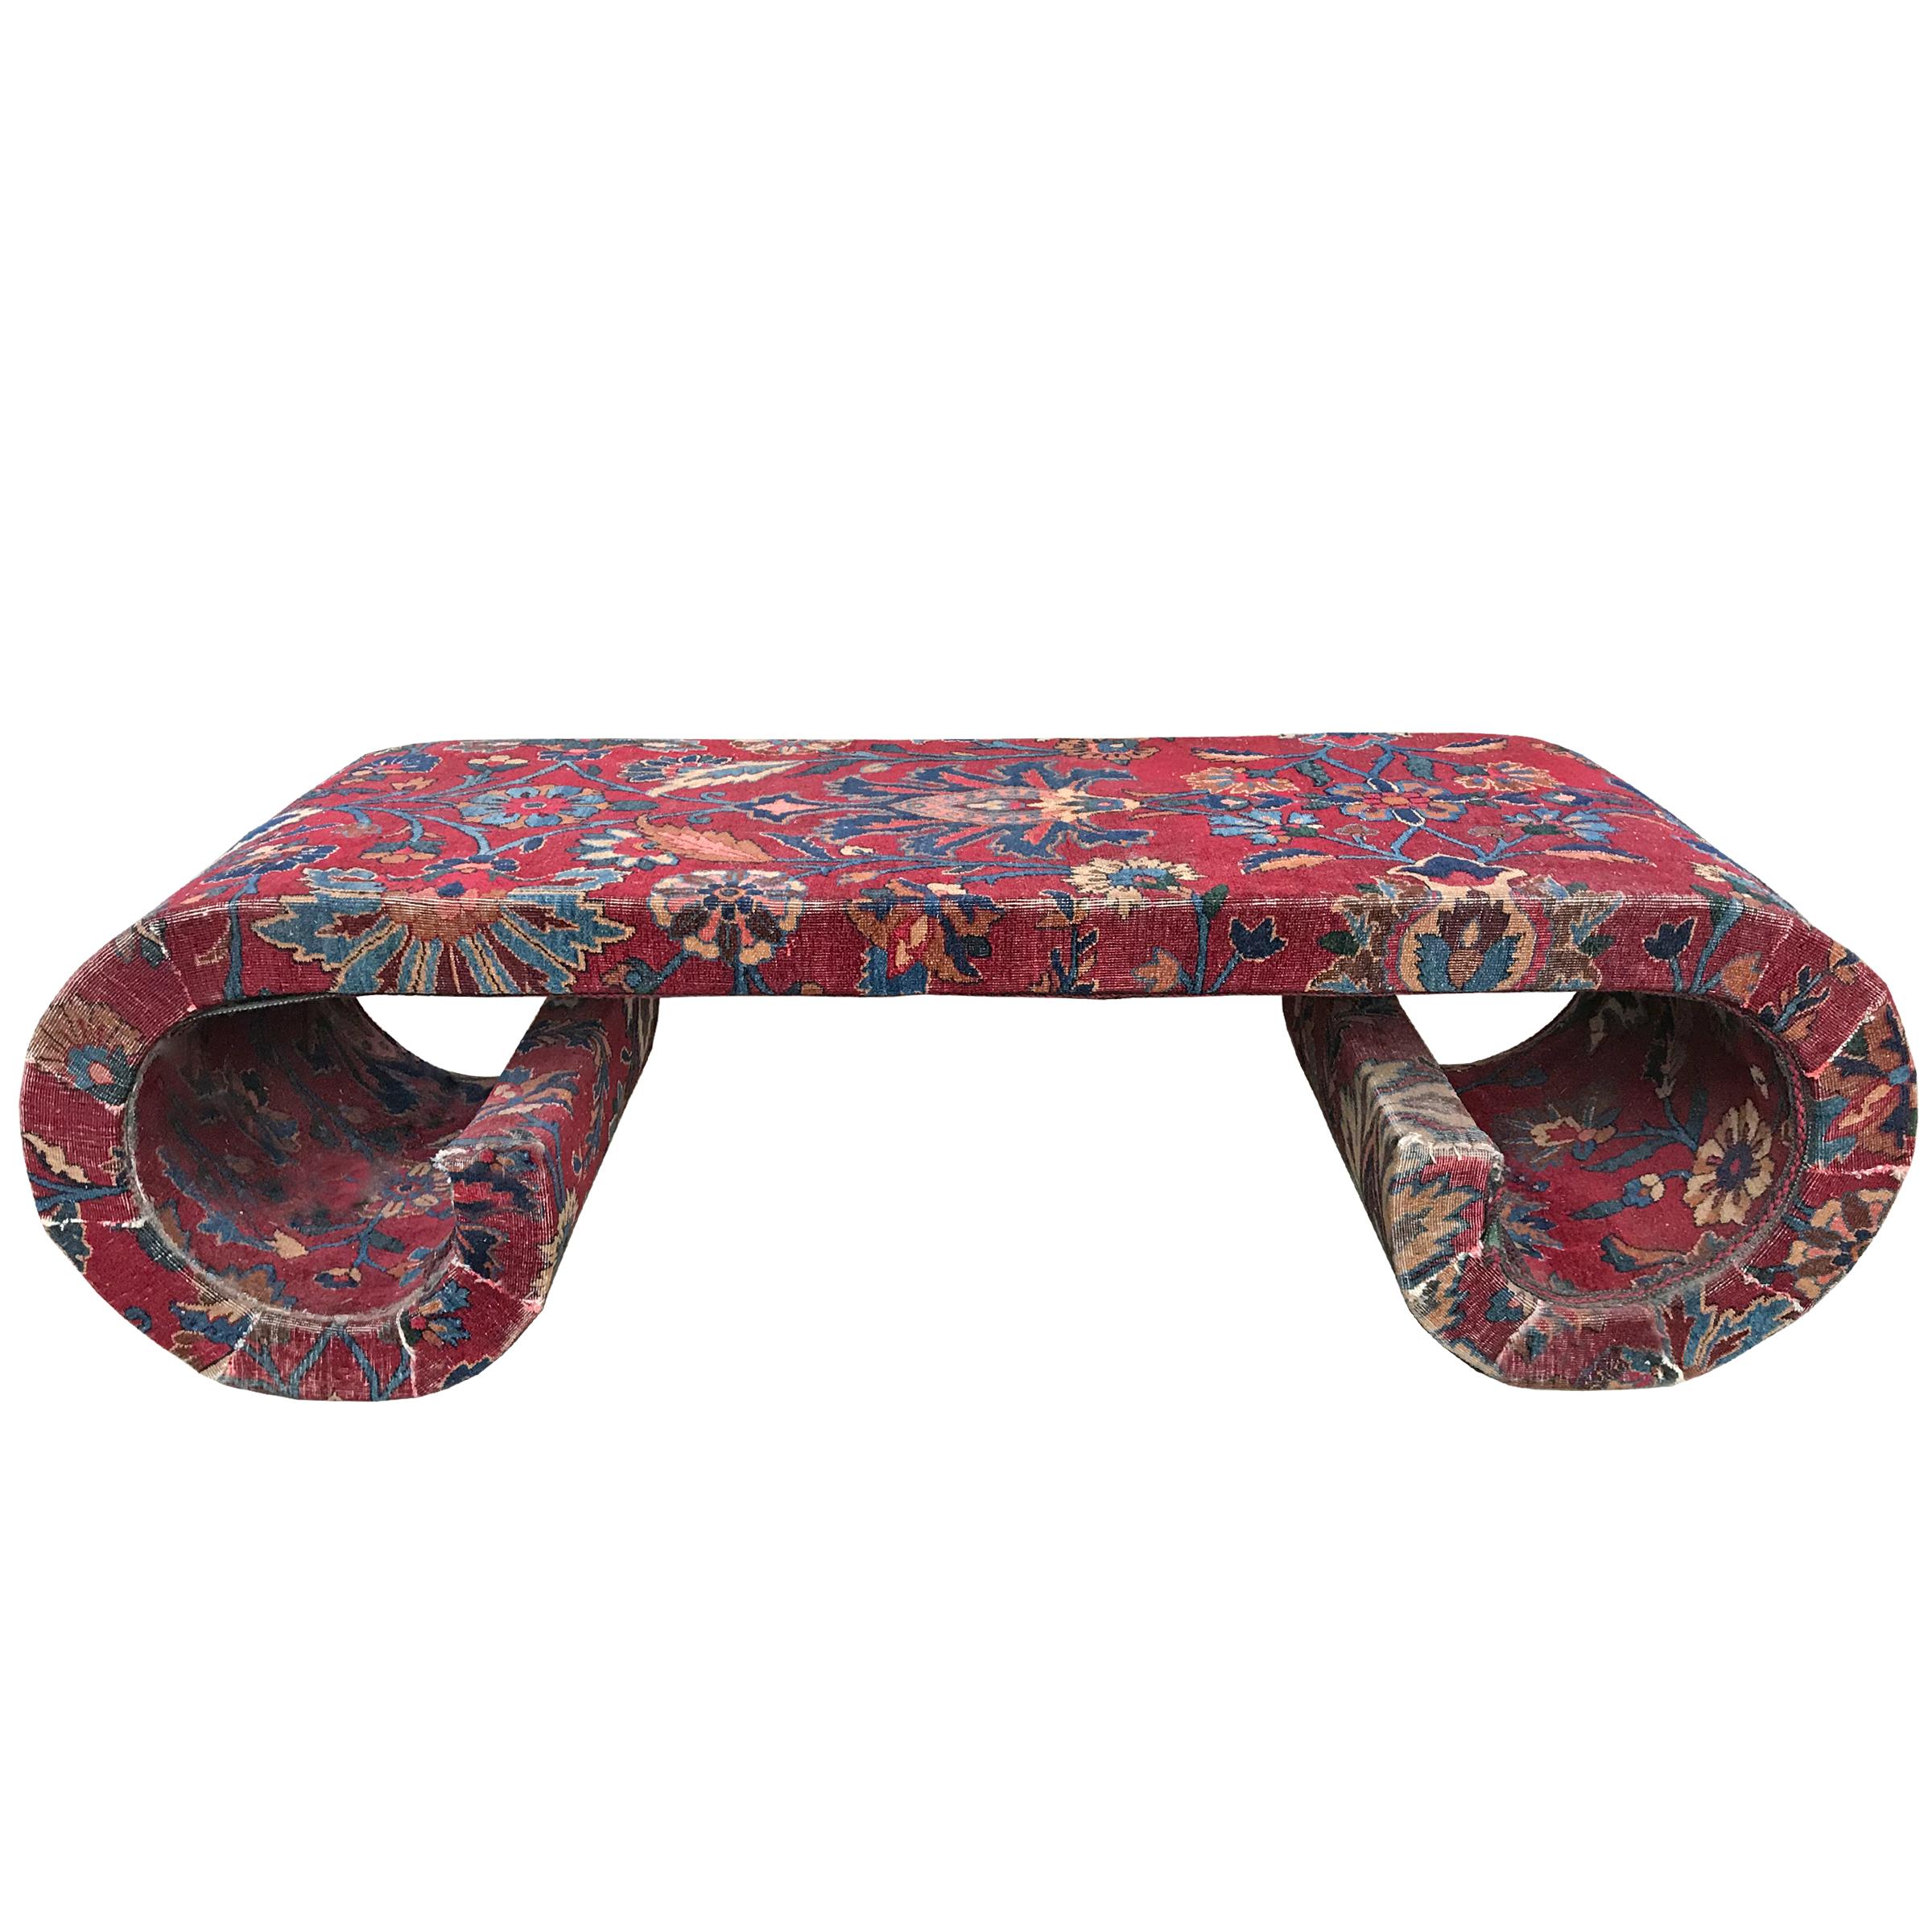 Mid-20th Century Low Scroll Table